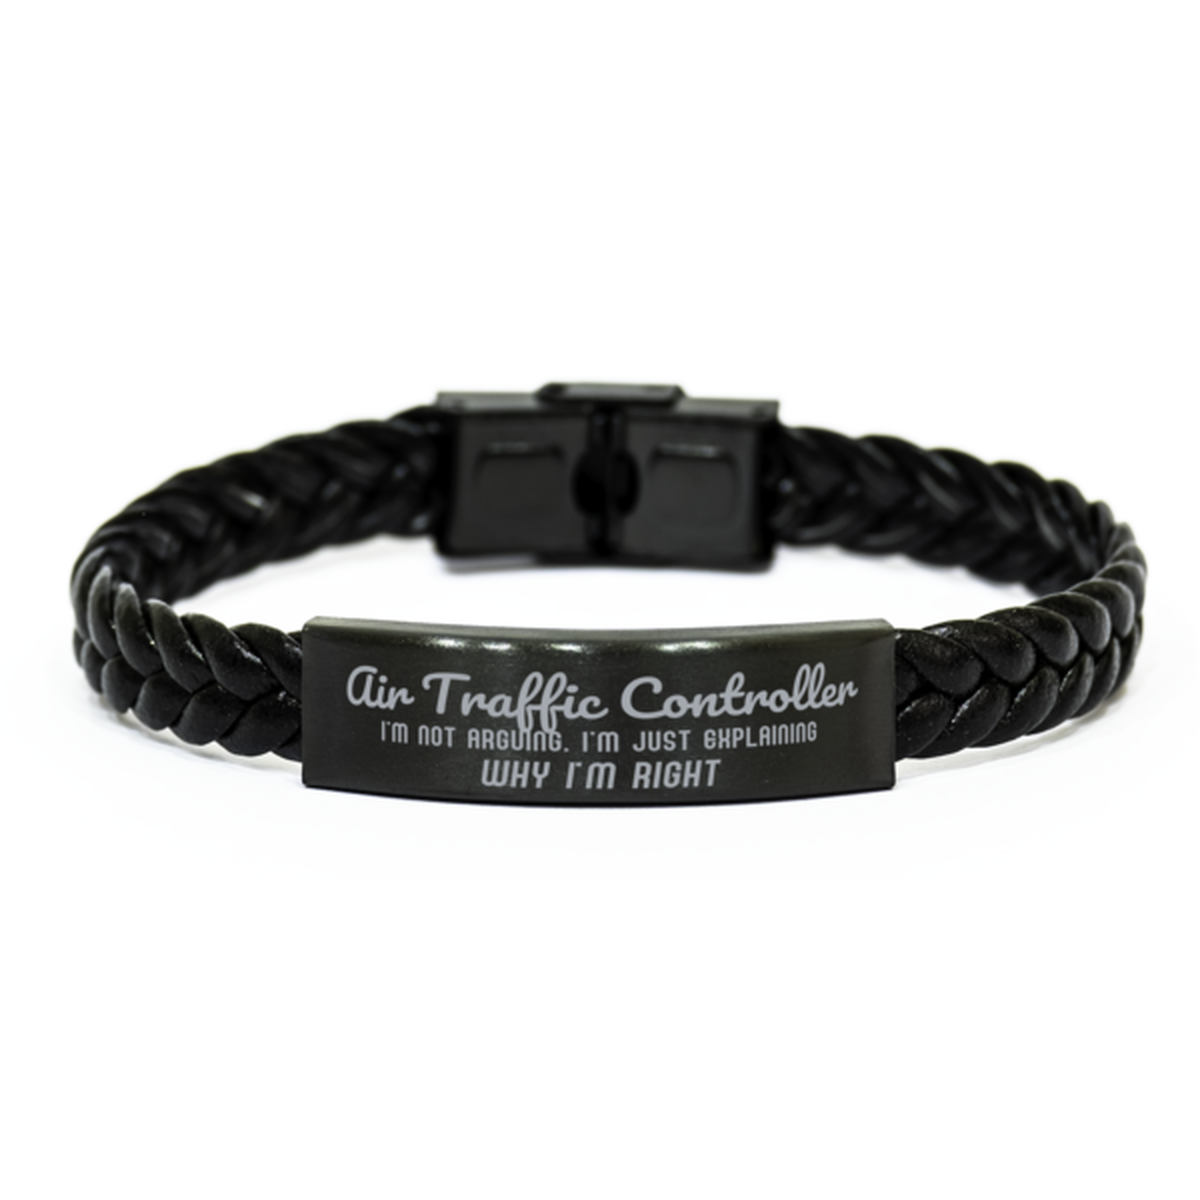 Air Traffic Controller I'm not Arguing. I'm Just Explaining Why I'm RIGHT Braided Leather Bracelet, Graduation Birthday Christmas Air Traffic Controller Gifts For Air Traffic Controller Funny Saying Quote Present for Men Women Coworker